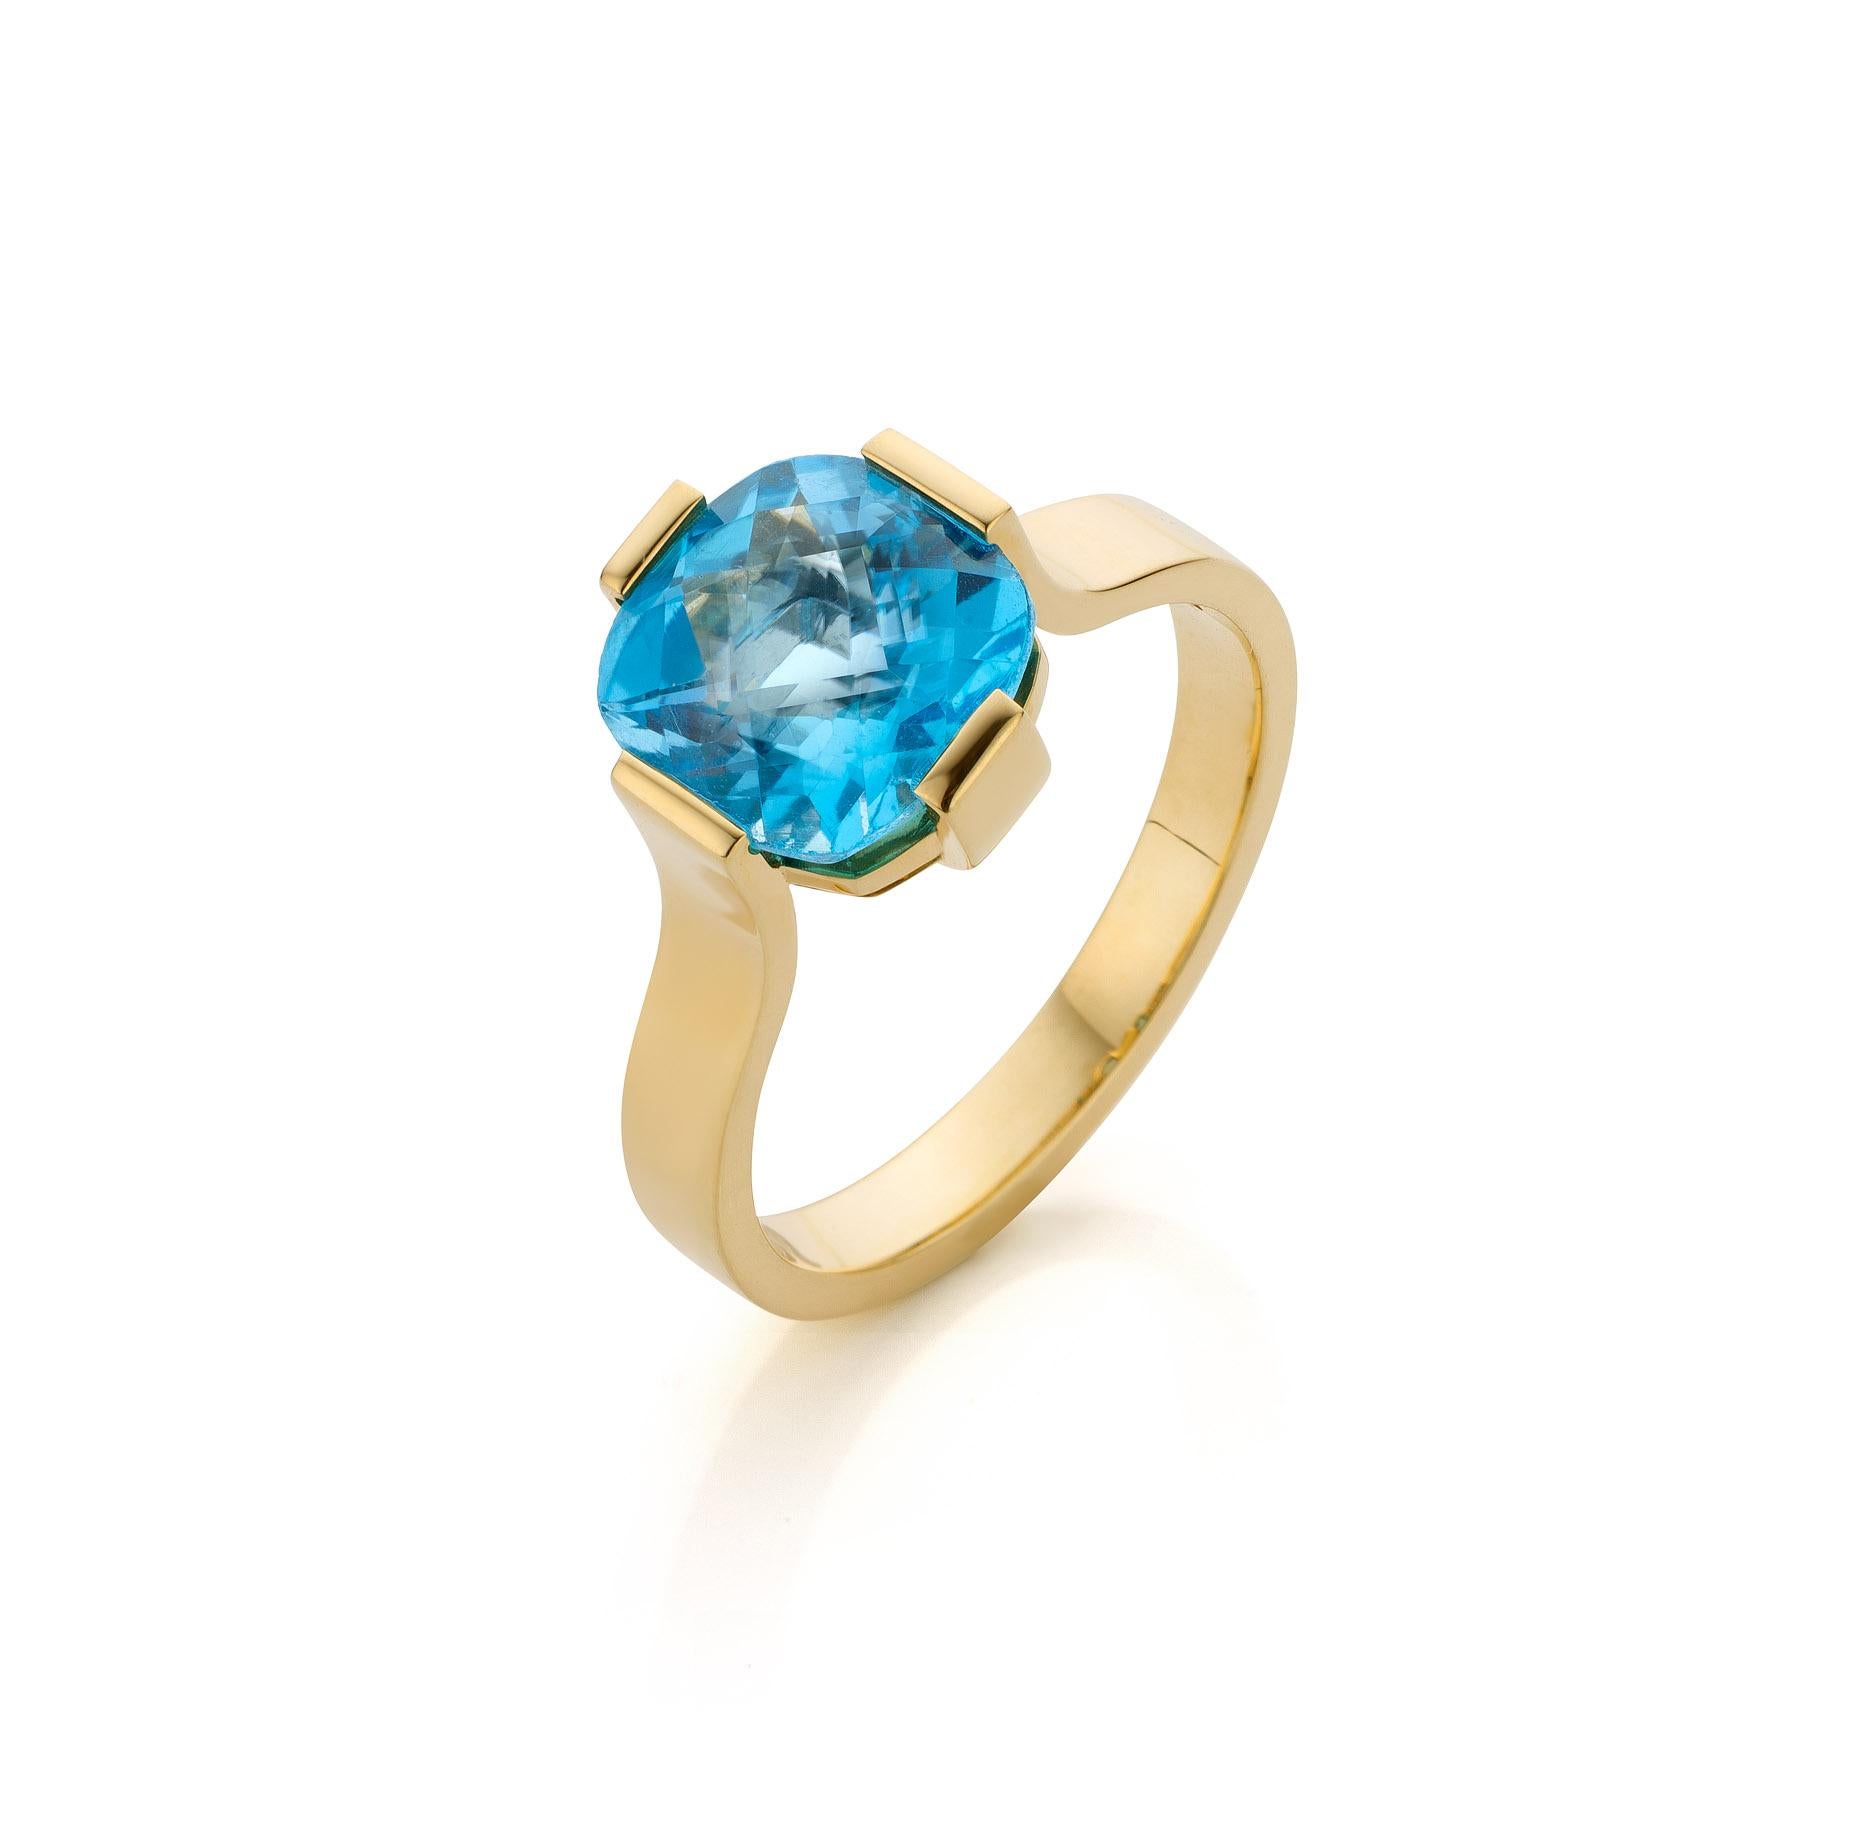 For Sale:  Cober “Blue Topaz Solitaire” set with a 3.25 Carat Blue Topaz Yellow Gold Ring 5